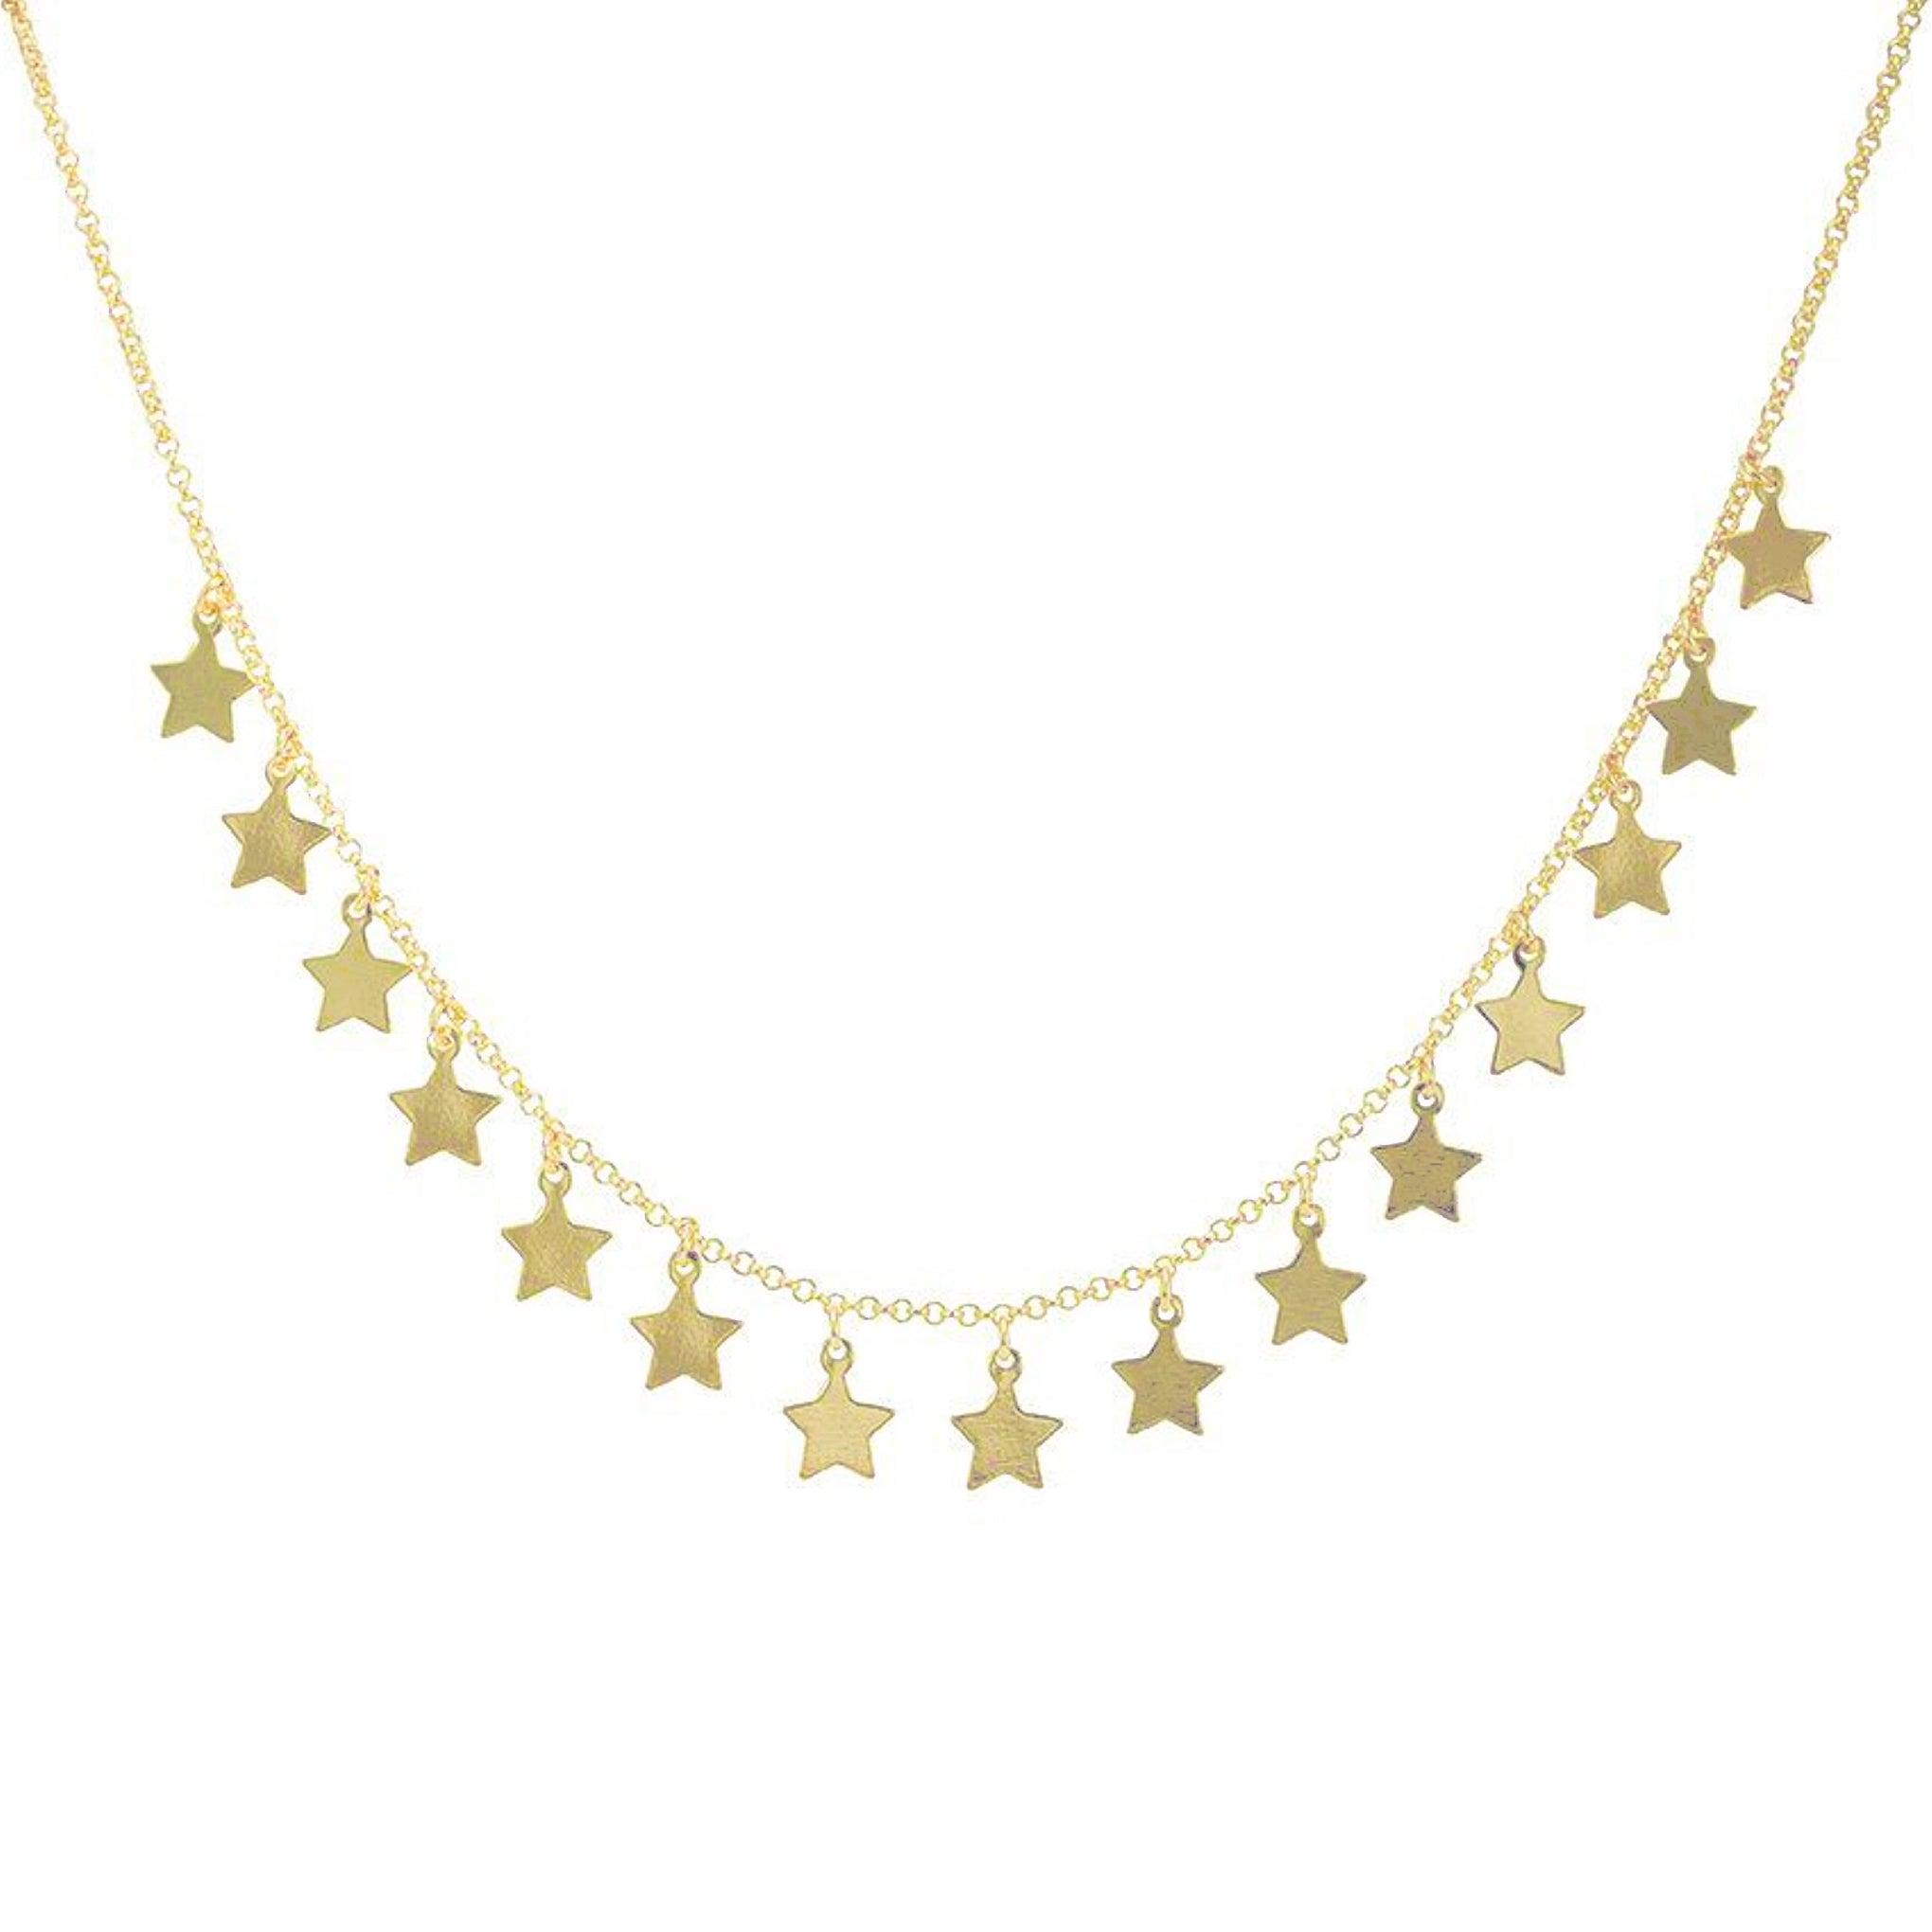 Detail image of Sheila Fajl Capella Multi Star Charm Dangle Necklace in Gold Plated